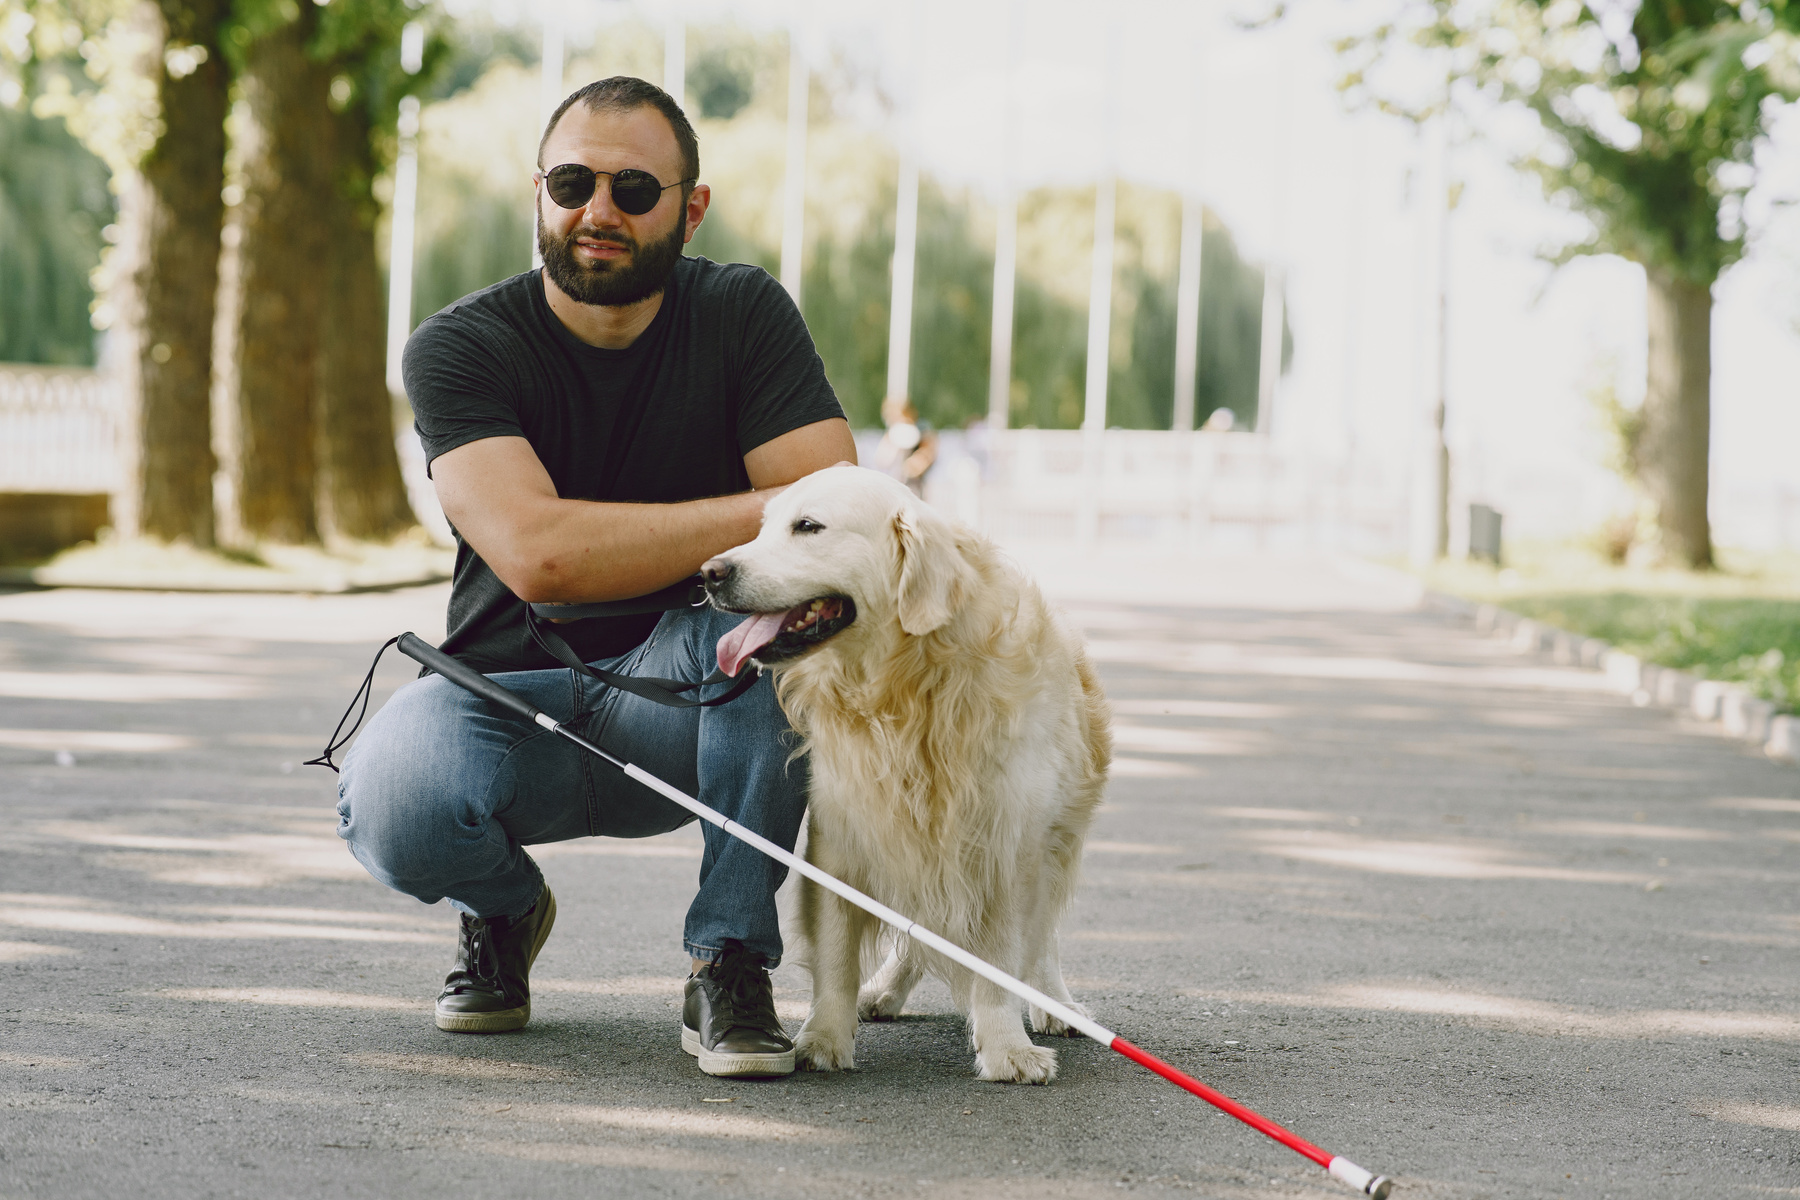 Blind Man with Guide Dog in a Summer City